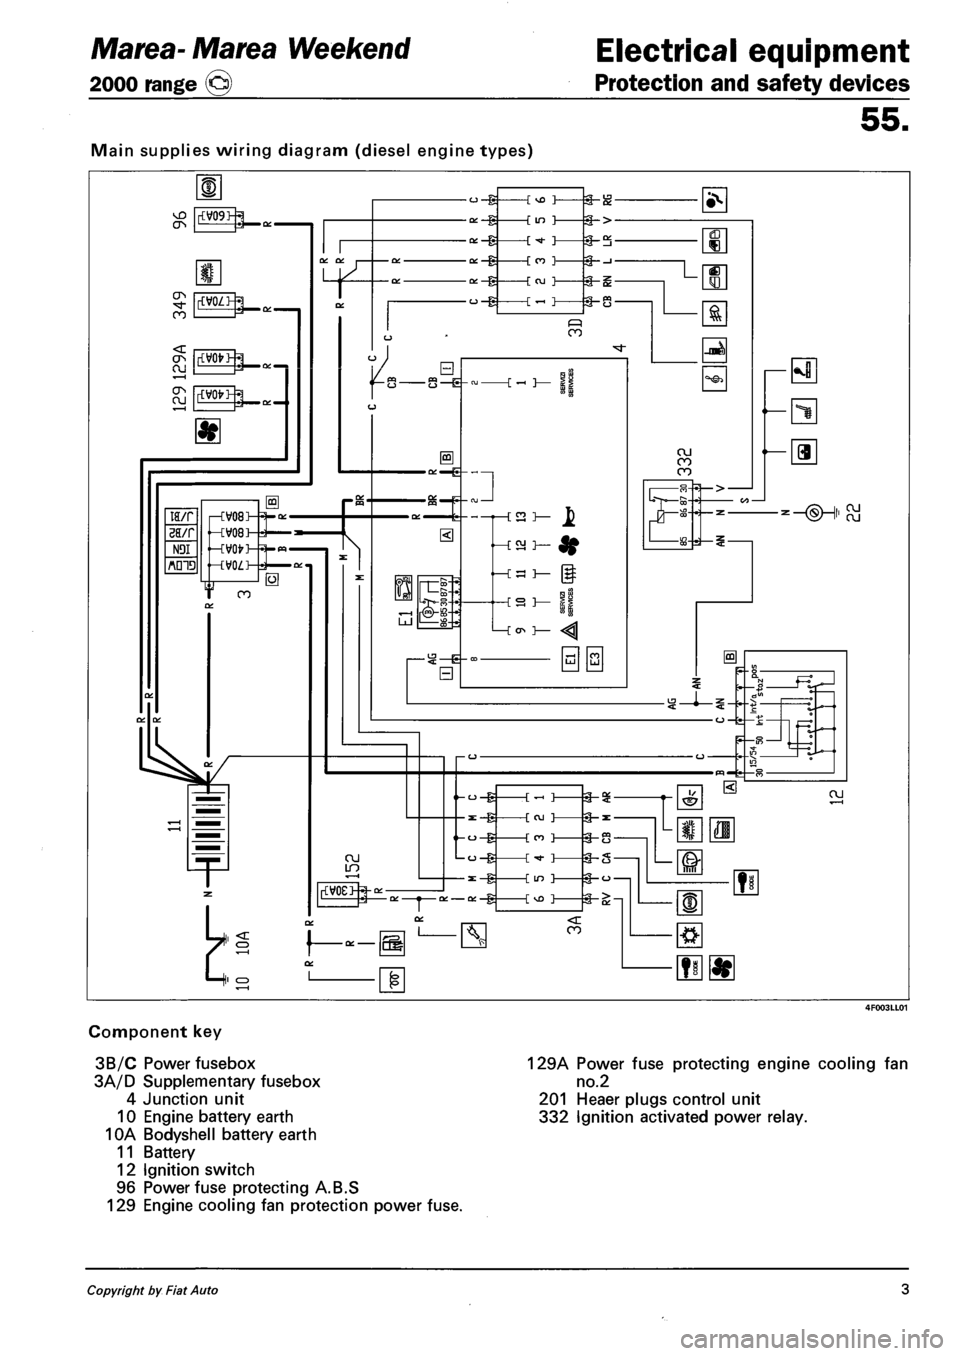 FIAT MAREA 2000 1.G Workshop Manual Marea- Marea Weekend 
2000 range ©) 
Electrical equipment 
Protection and safety devices 
55. 
Main supplies wiring diagram (diesel engine types) 
Component key 
3B/C Power fusebox 
3A/D Supplementar